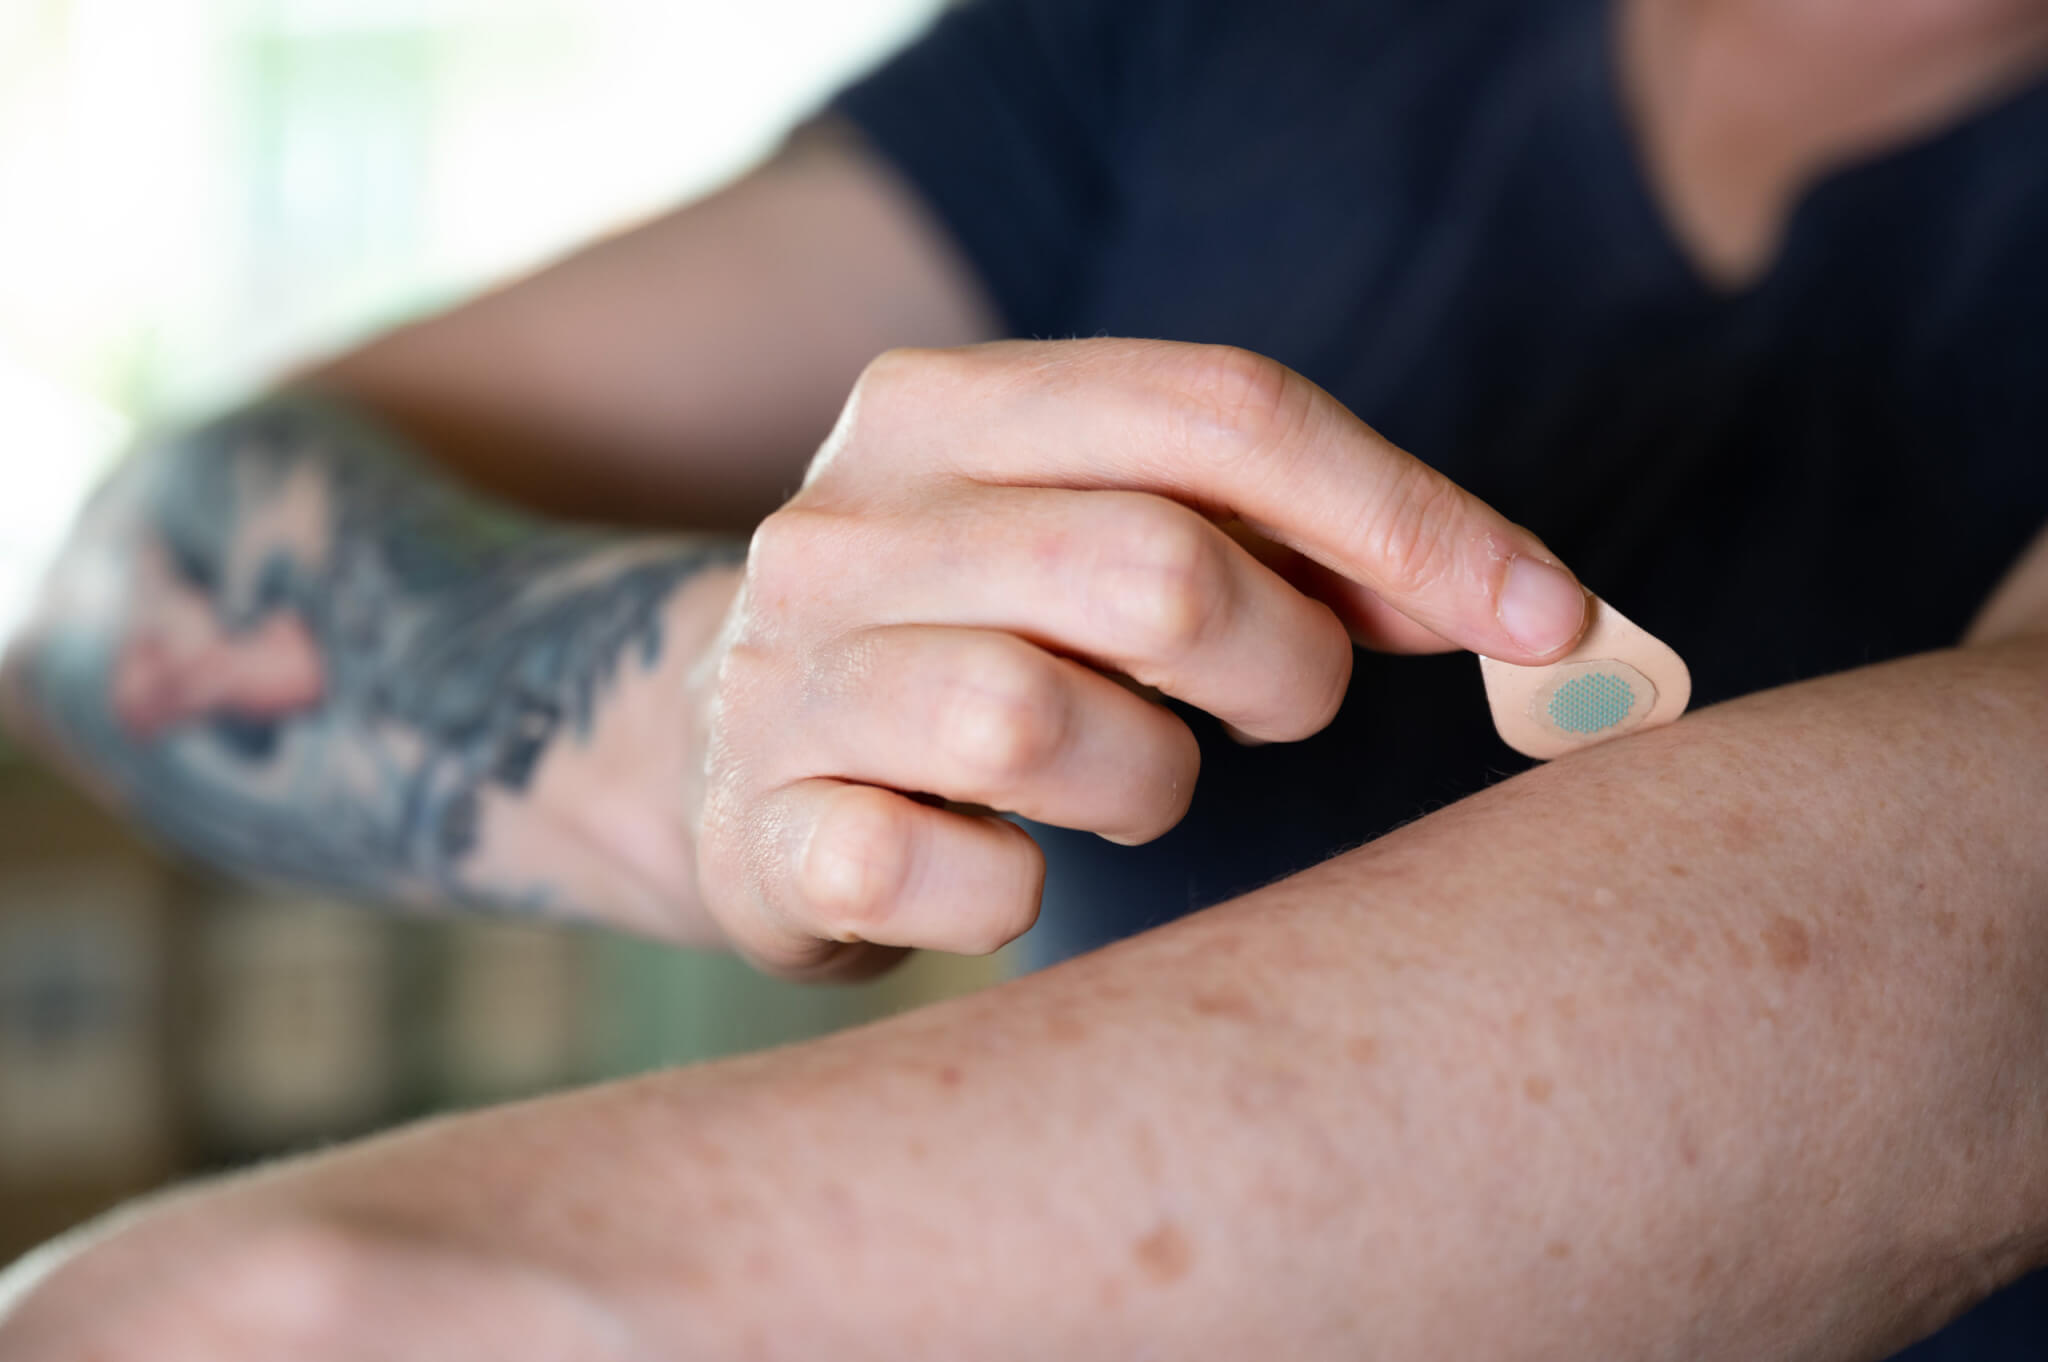 Tattoo 'patch' made from microneedles offers pain-free alternative to  getting inked - Study Finds